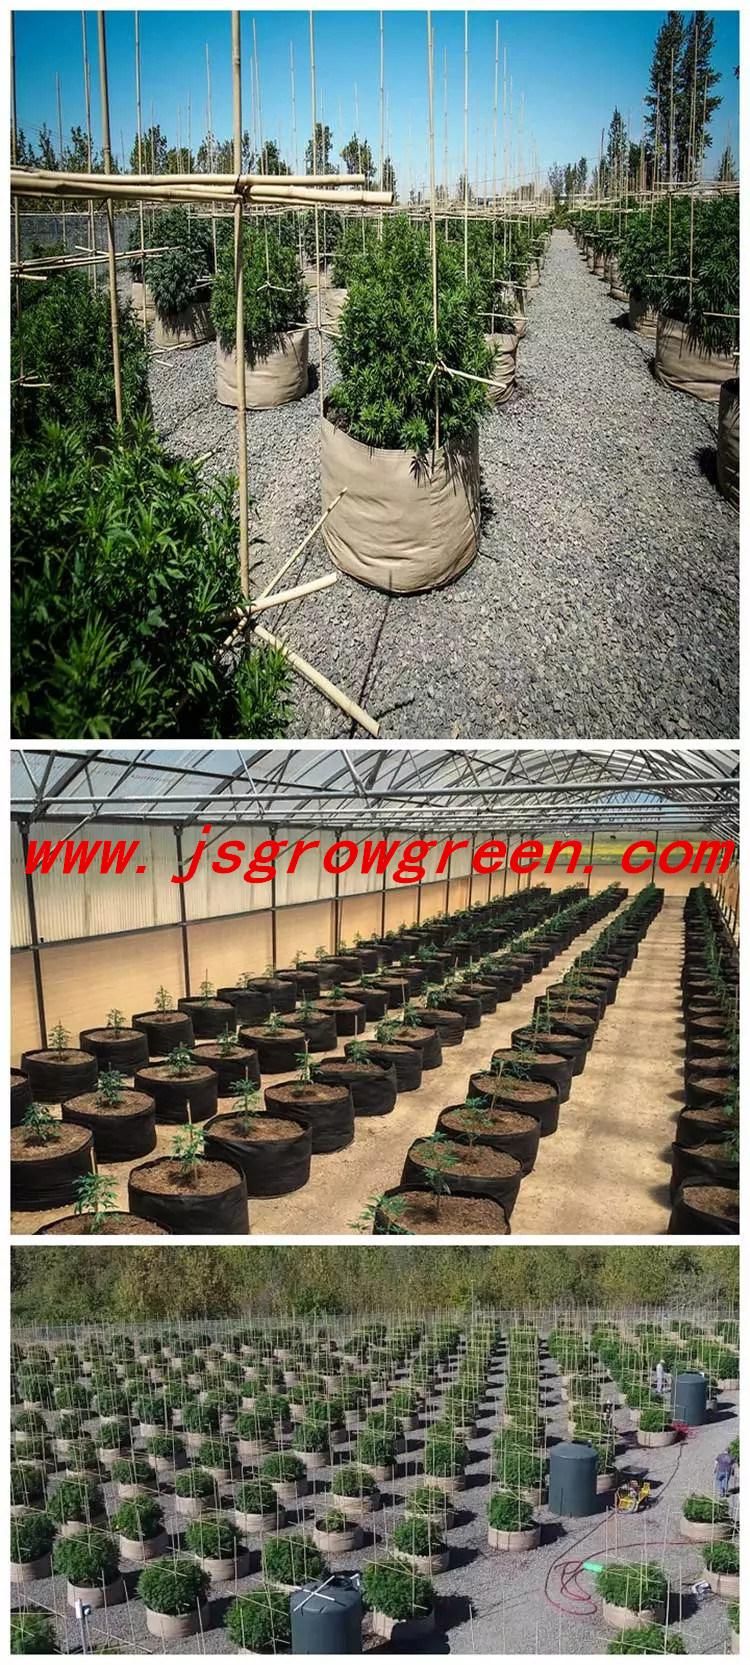 Grow-Green Grow Bags, Raised Garden Bed|Plant Containers|Fabric Pots|Planter Bag From